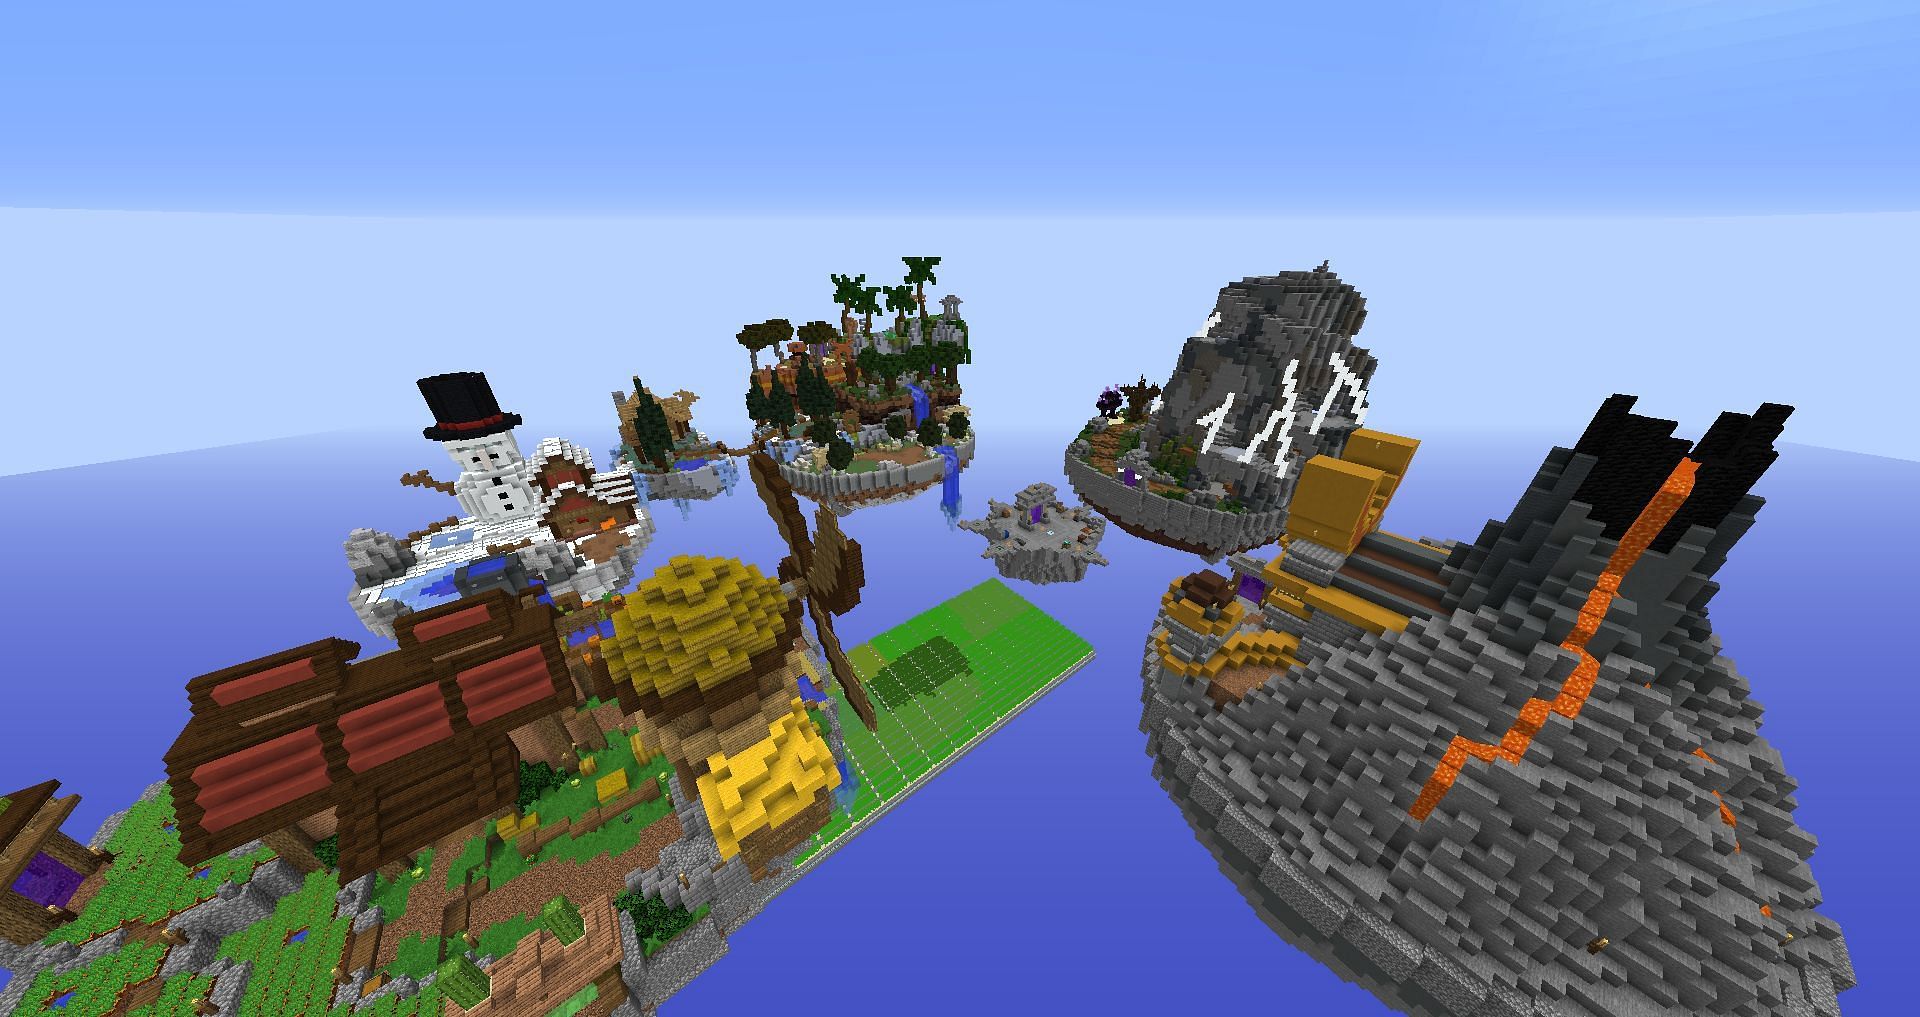 Farming is a significant part of gameplay for some Skyblock servers (Image via Hypixel)